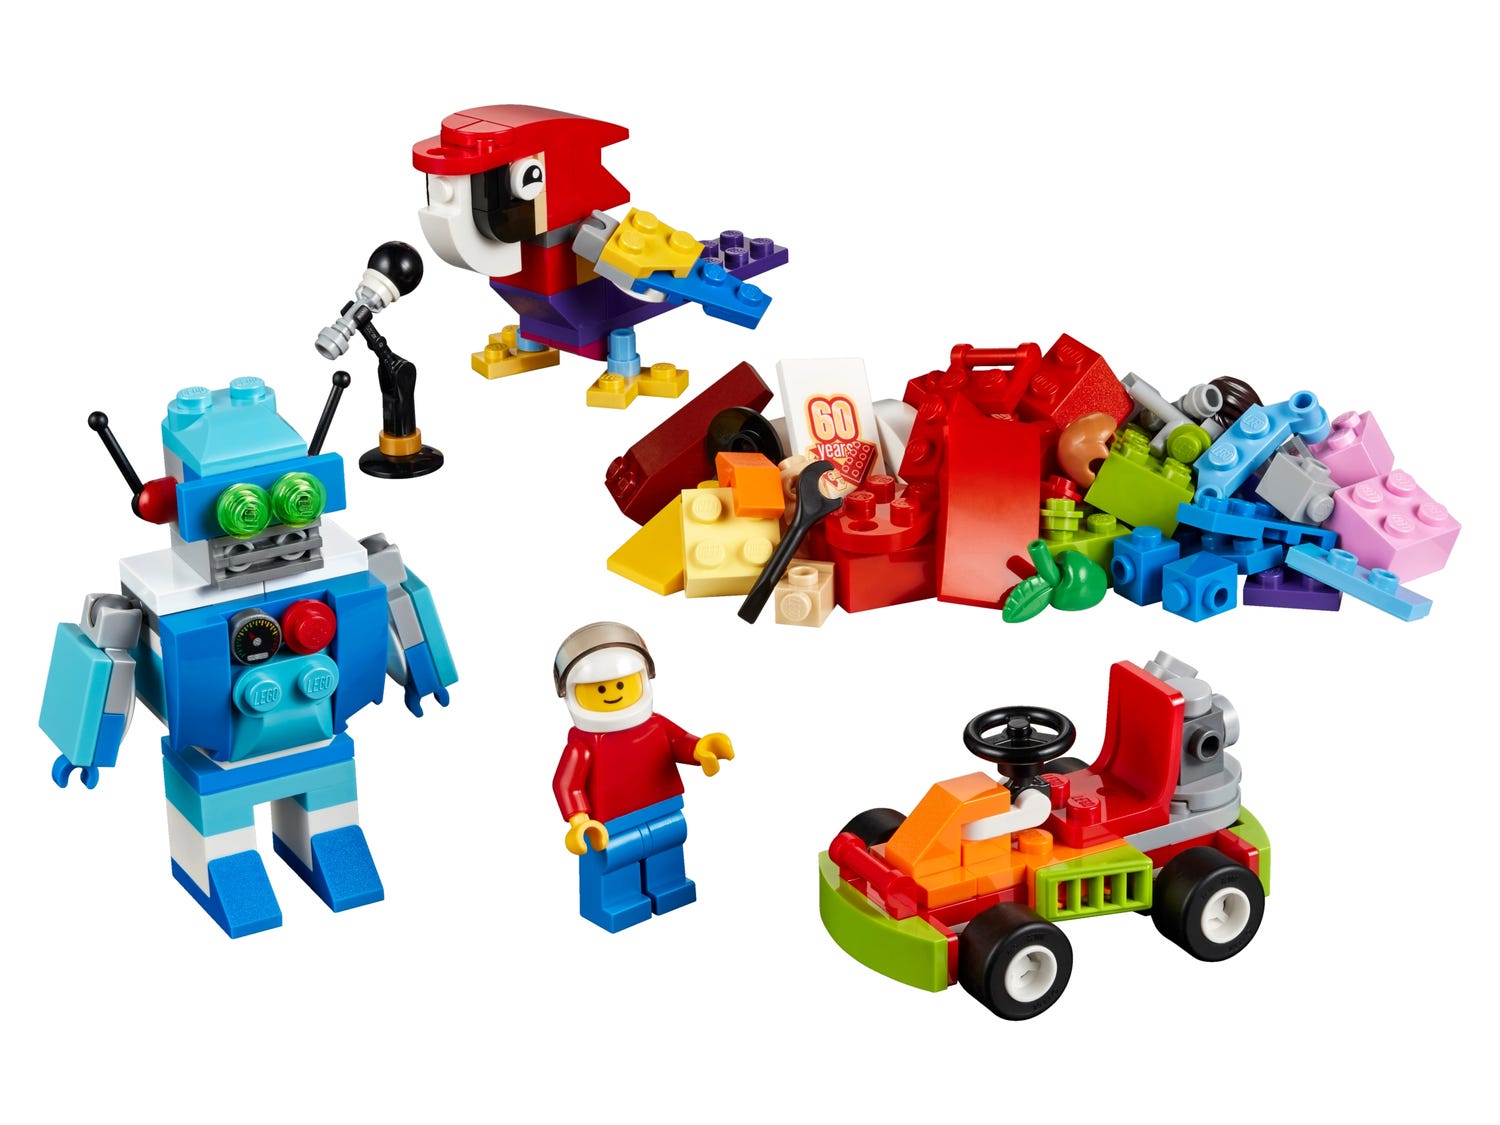 Fun Future 10402 Classic | Buy online at Official LEGO® Shop